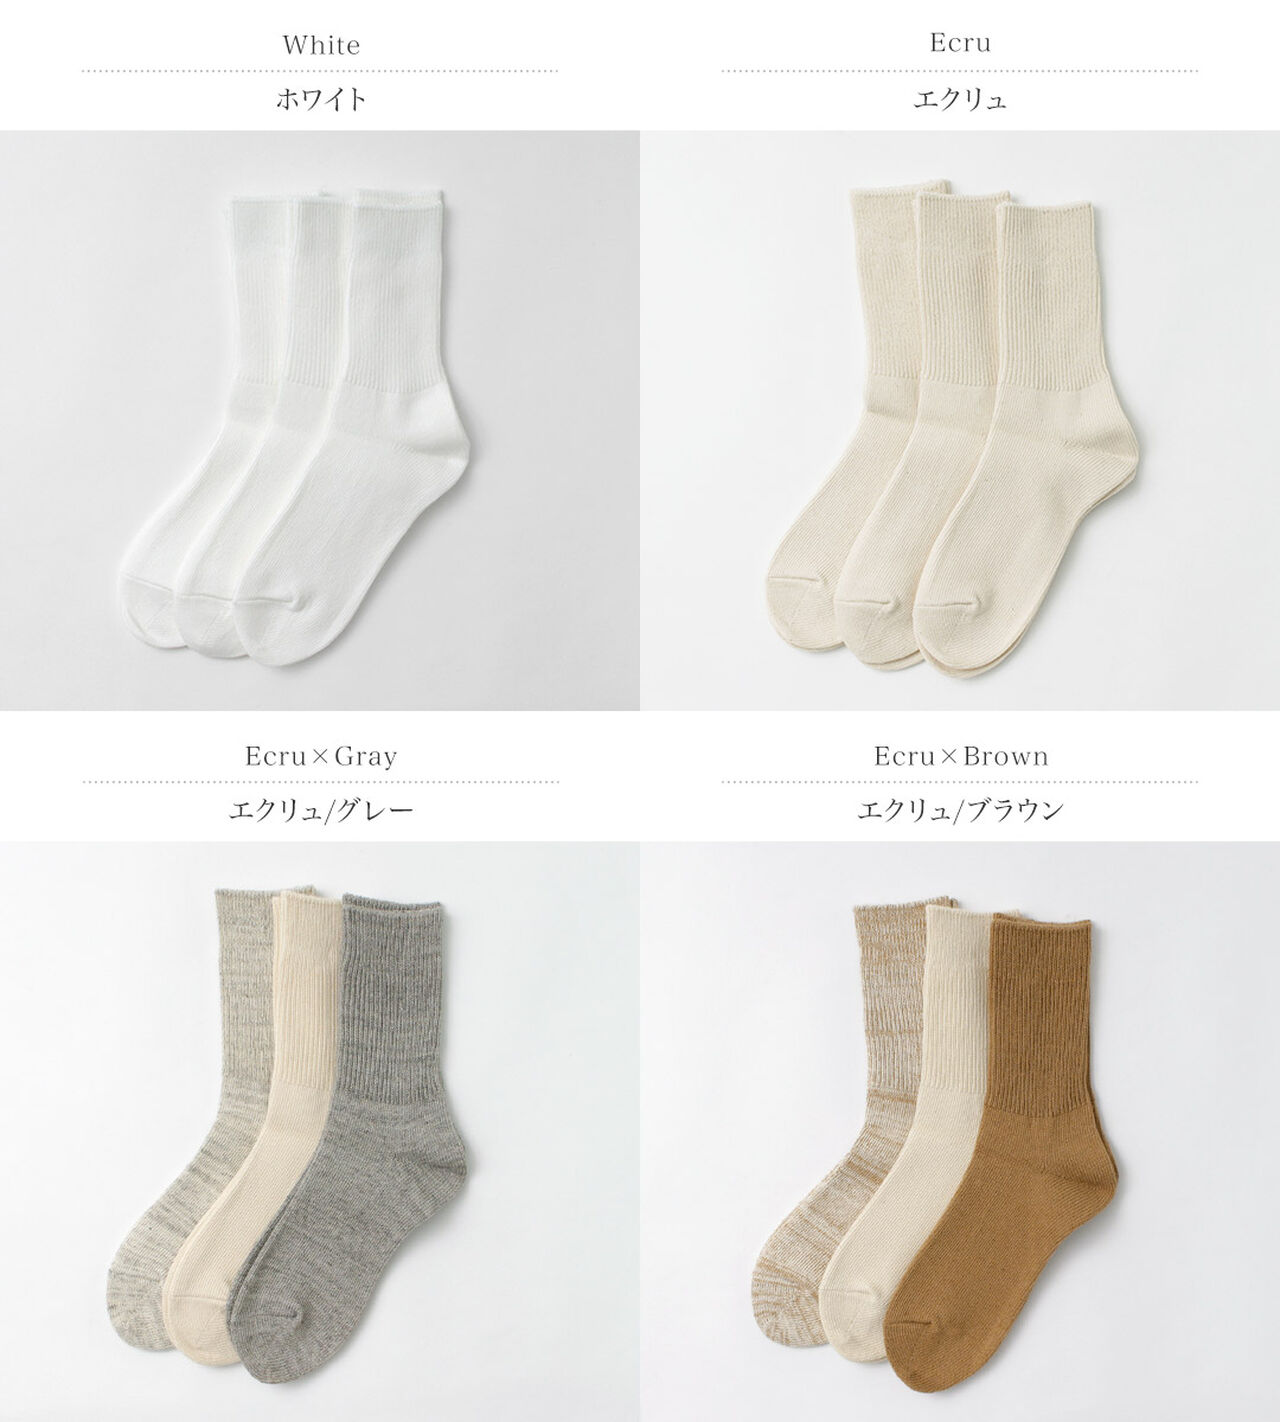 Women's Crew Socks 2-pack made with Organic Cotton